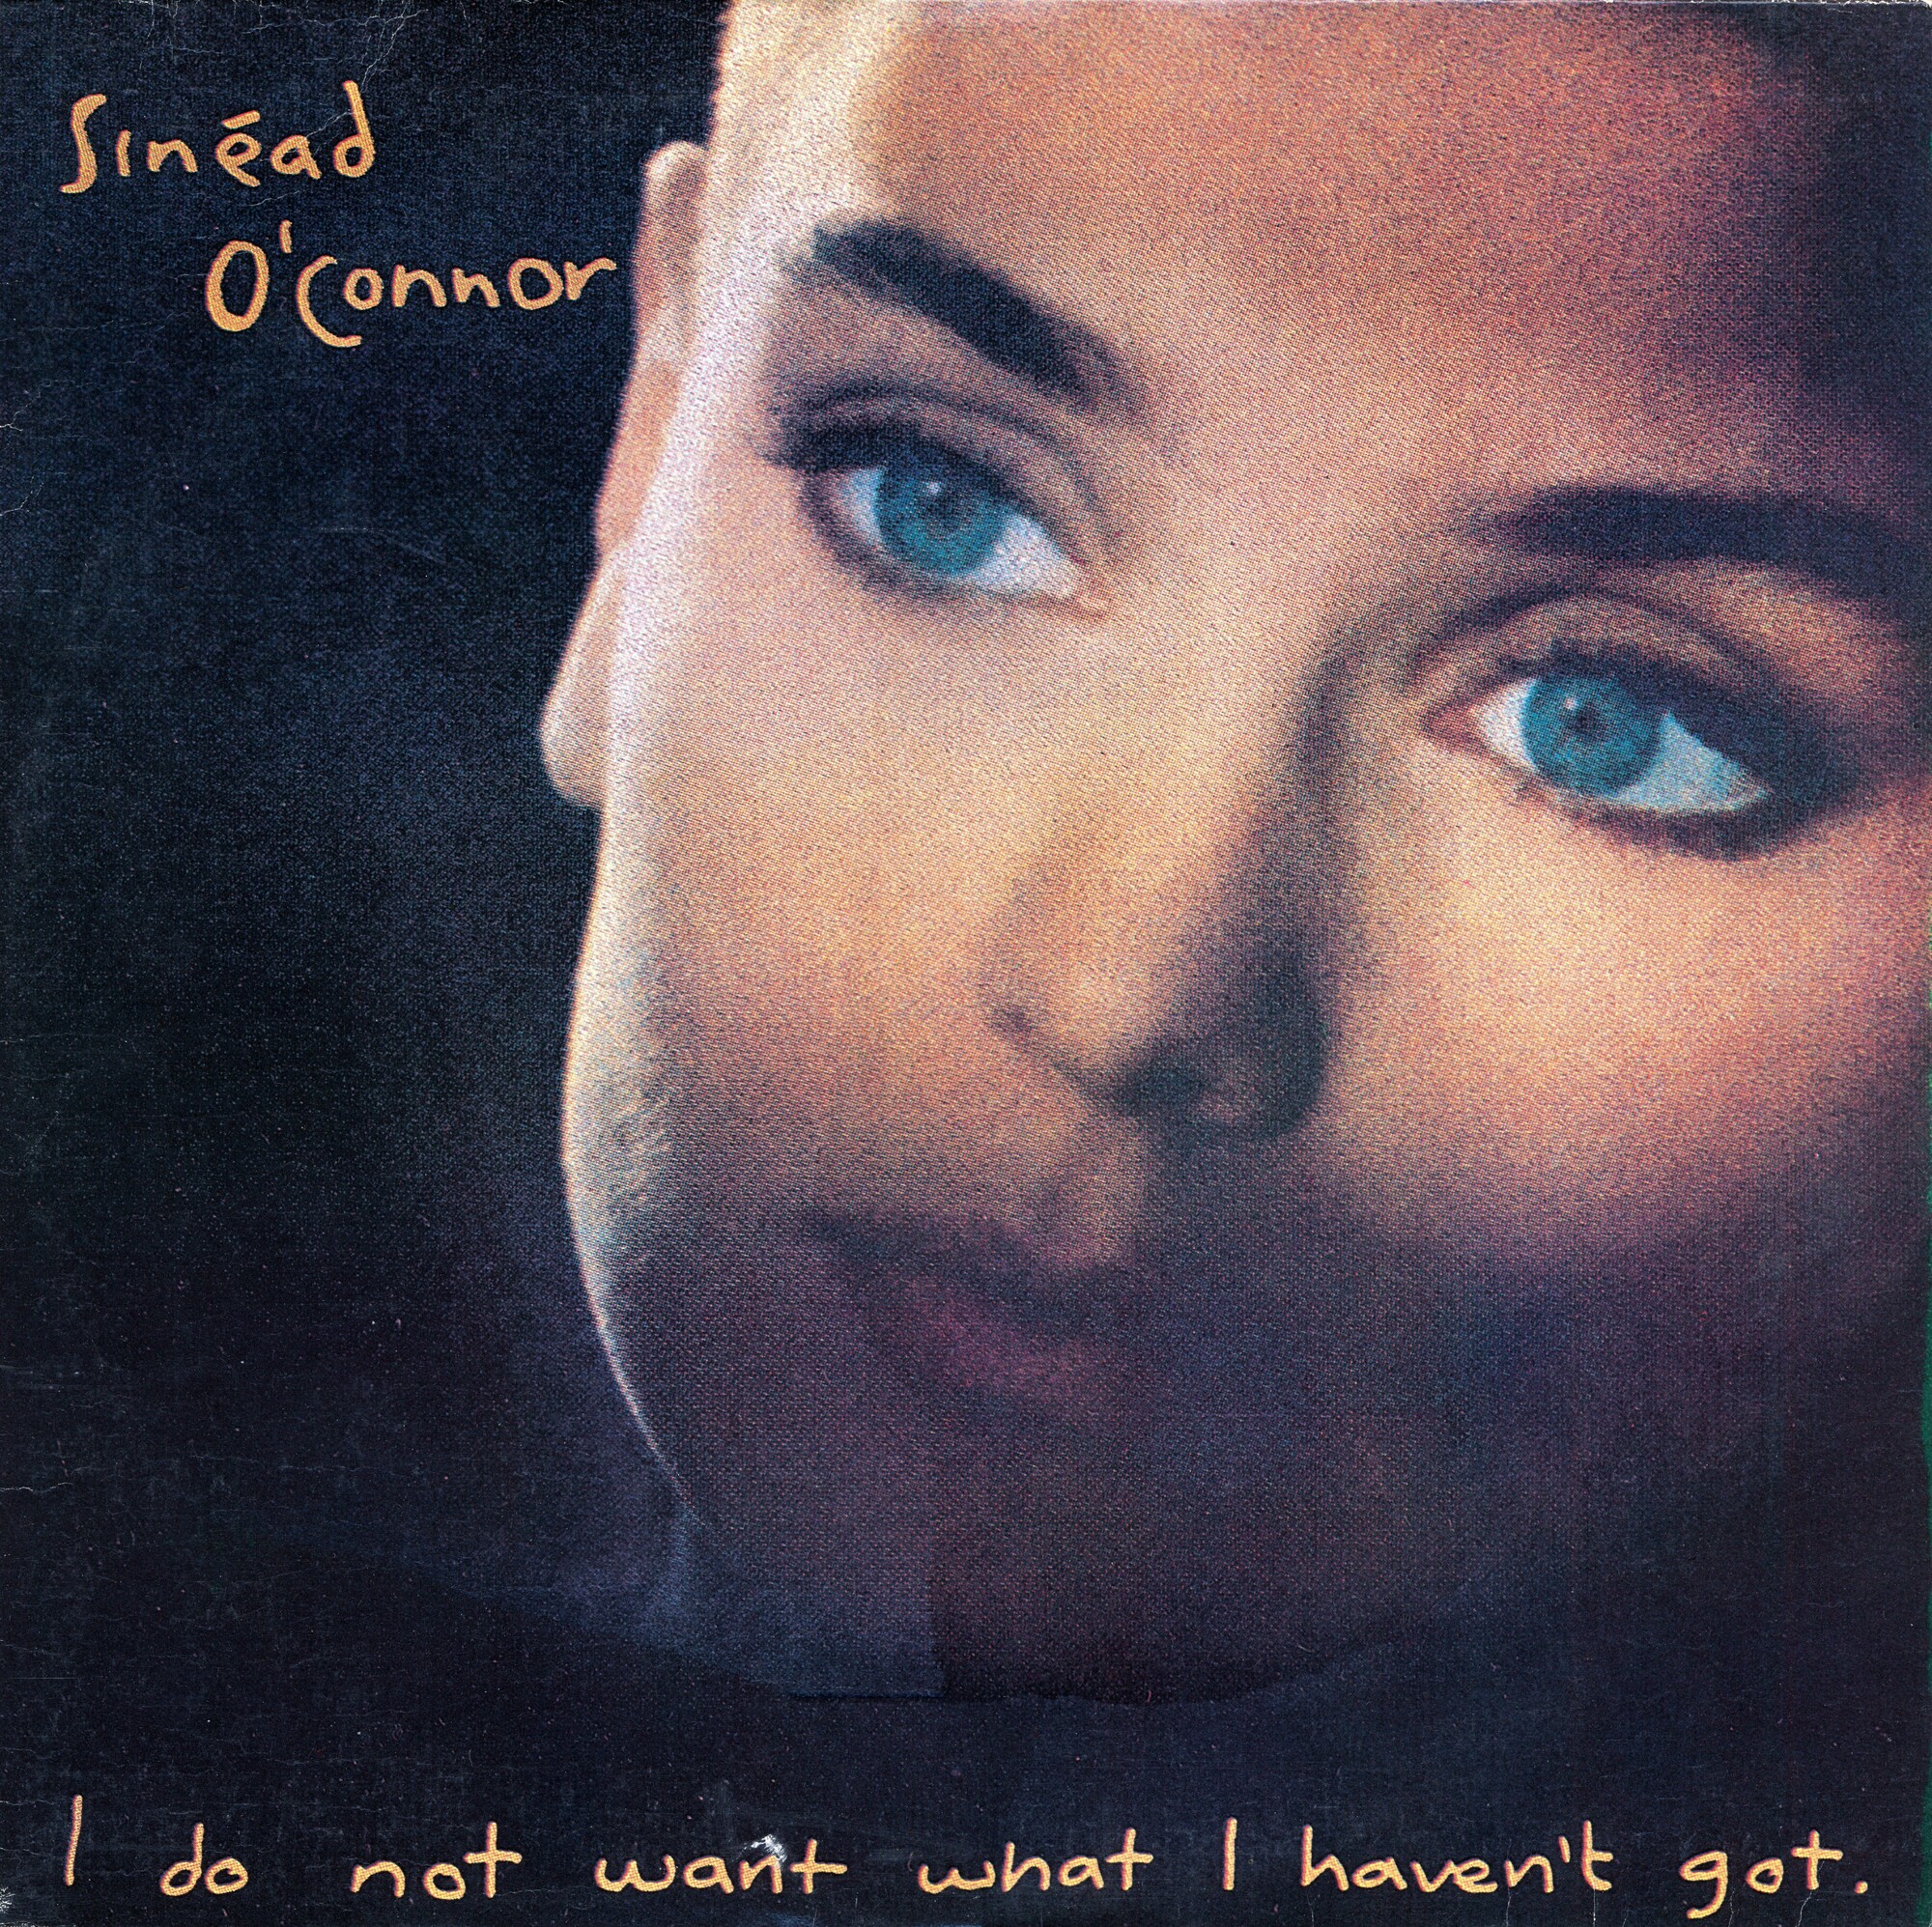 Sinead O’CONNOR. I do not want what I haven’t got